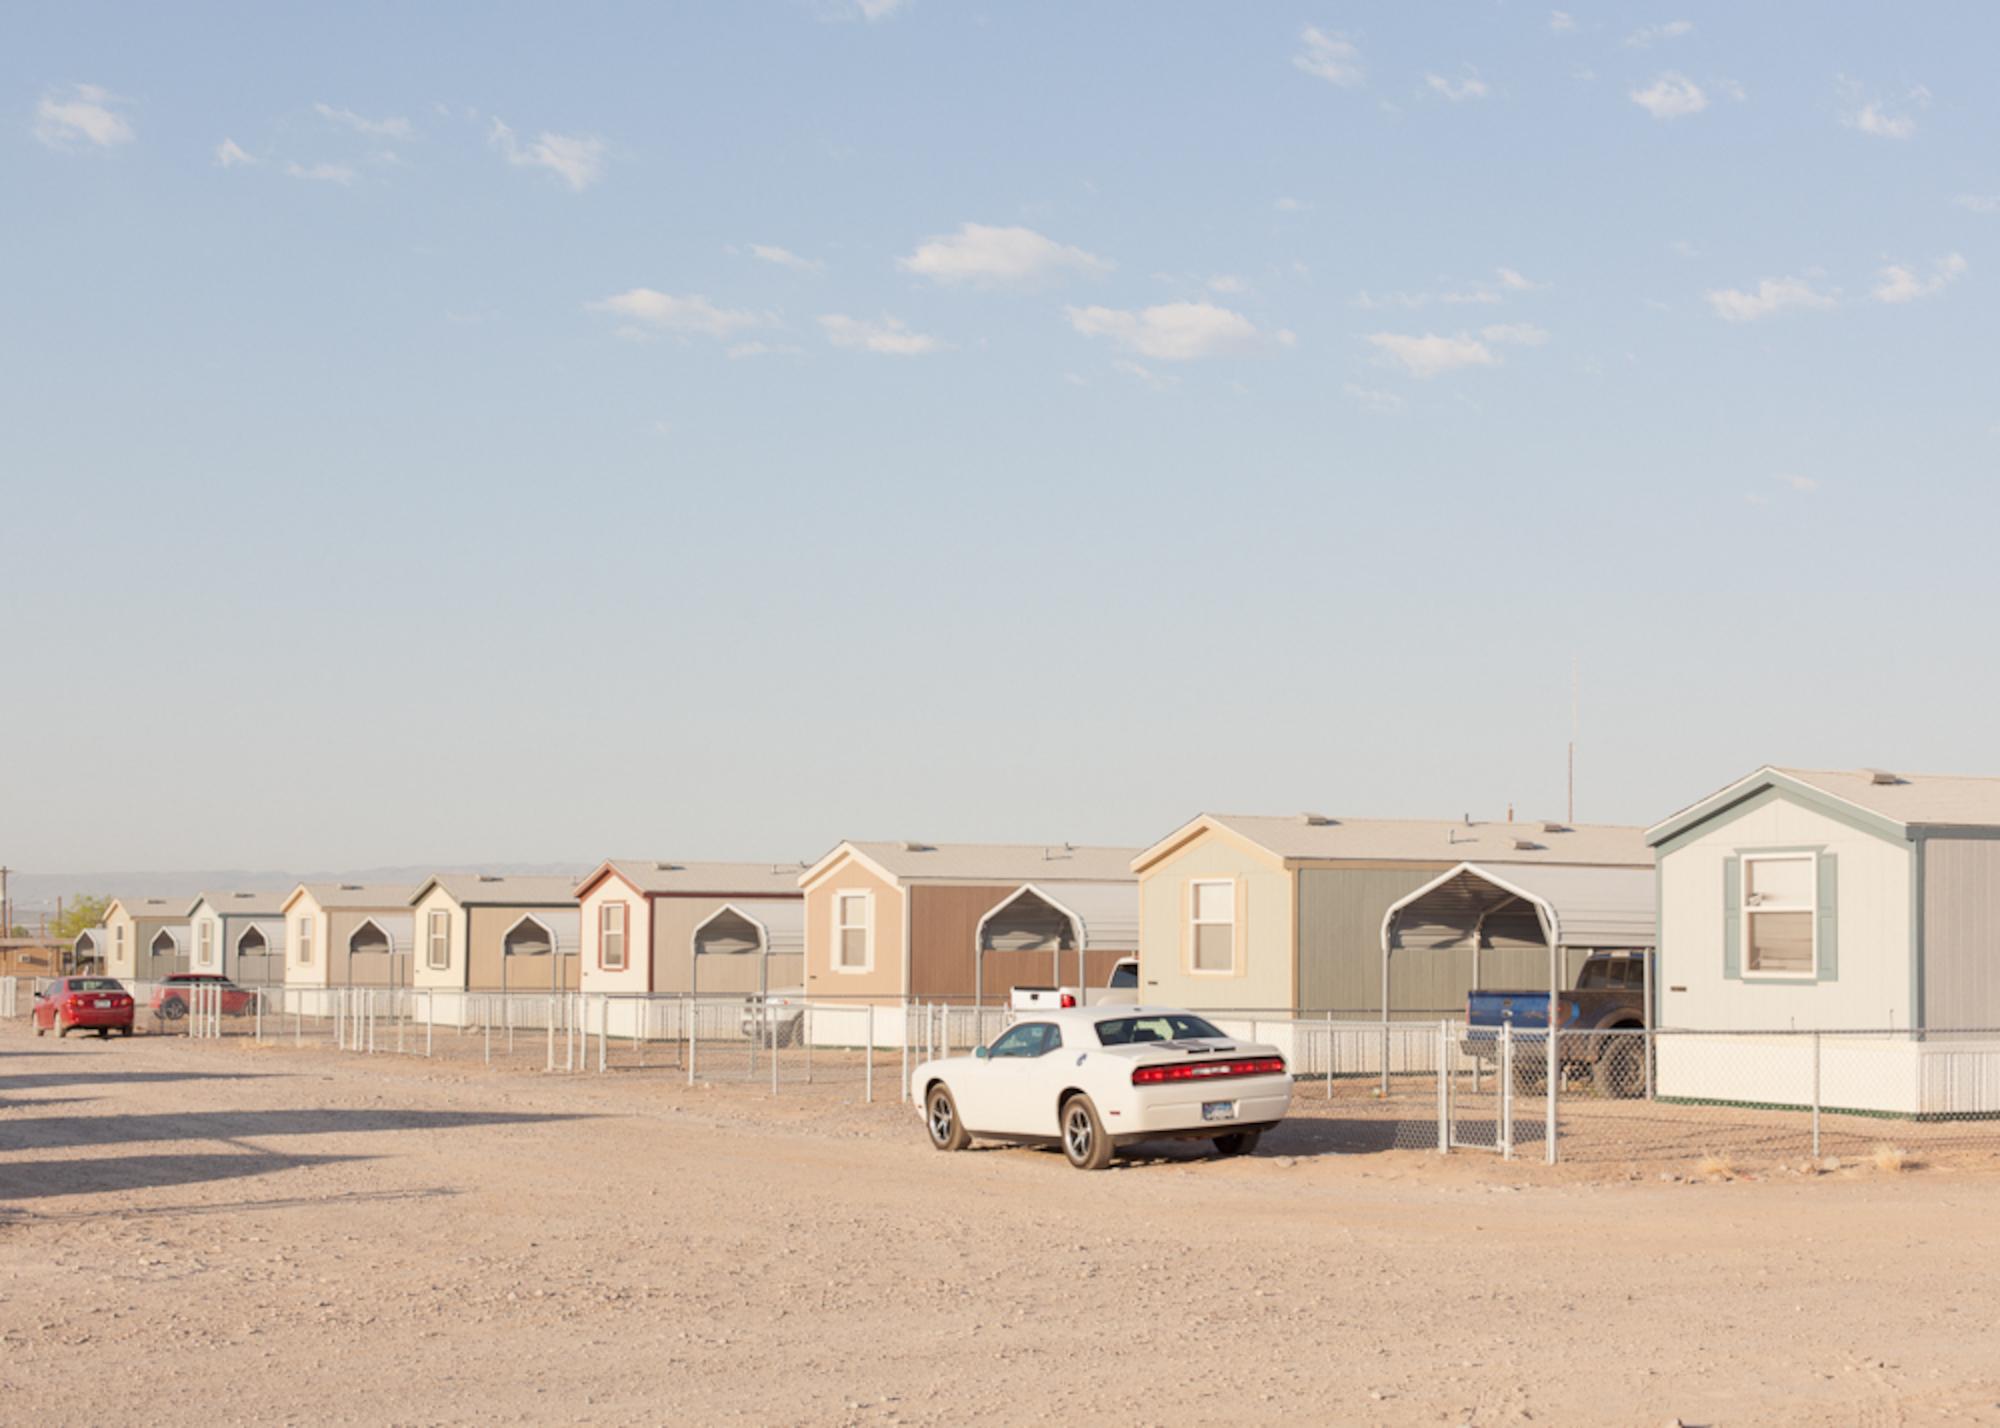 Jason Reed
New Border Patrol Government Housing
Presidio, TX
2011
Archival Inkjet Print
ed. 2/8+2AP
signed and numbered
print only, shipped in a roll

Three Palms Inn is a series of photographs about Presidio, Texas and the surrounding Rio Grande